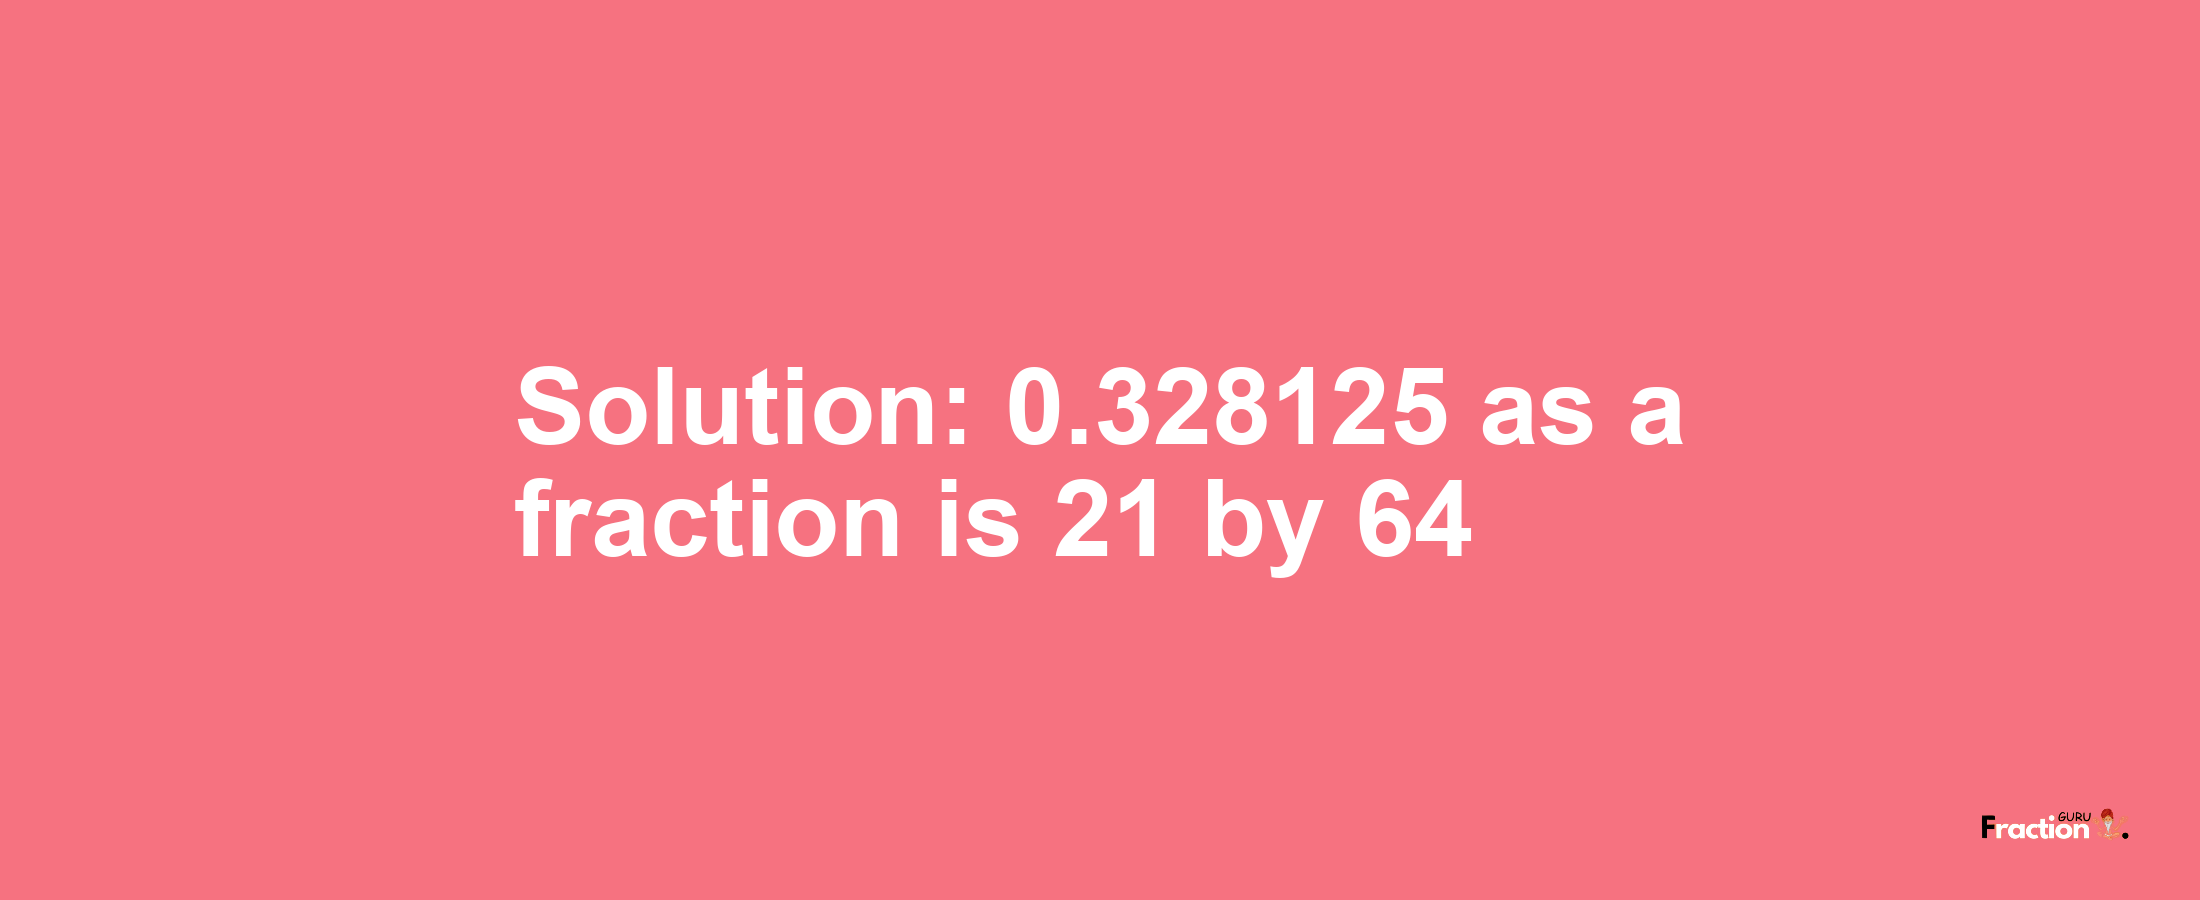 Solution:0.328125 as a fraction is 21/64